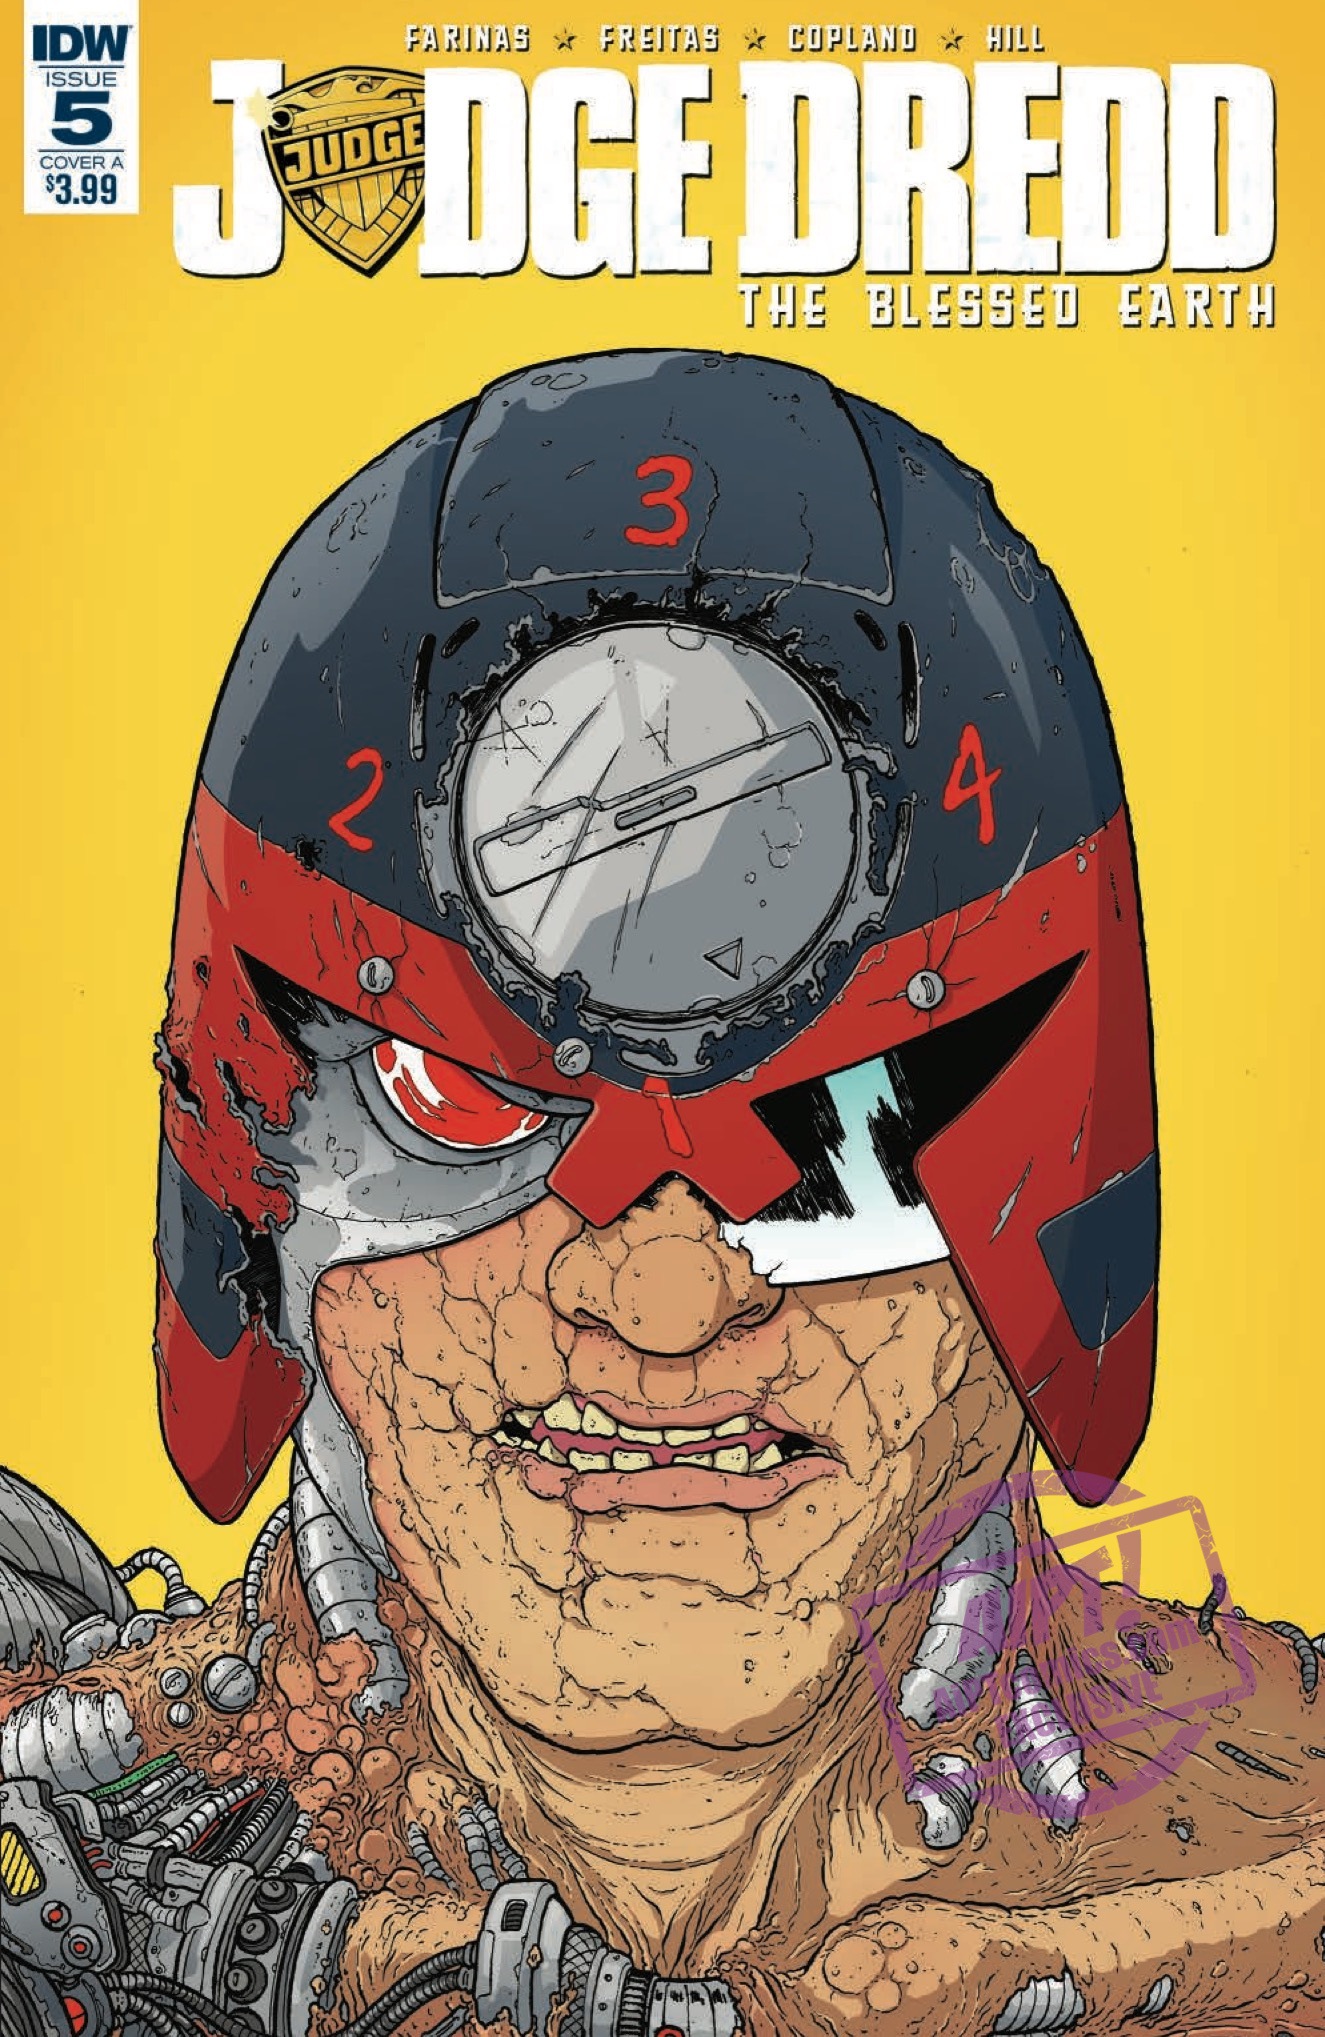 [EXCLUSIVE] IDW Preview: Judge Dredd: The Blessed Earth #5